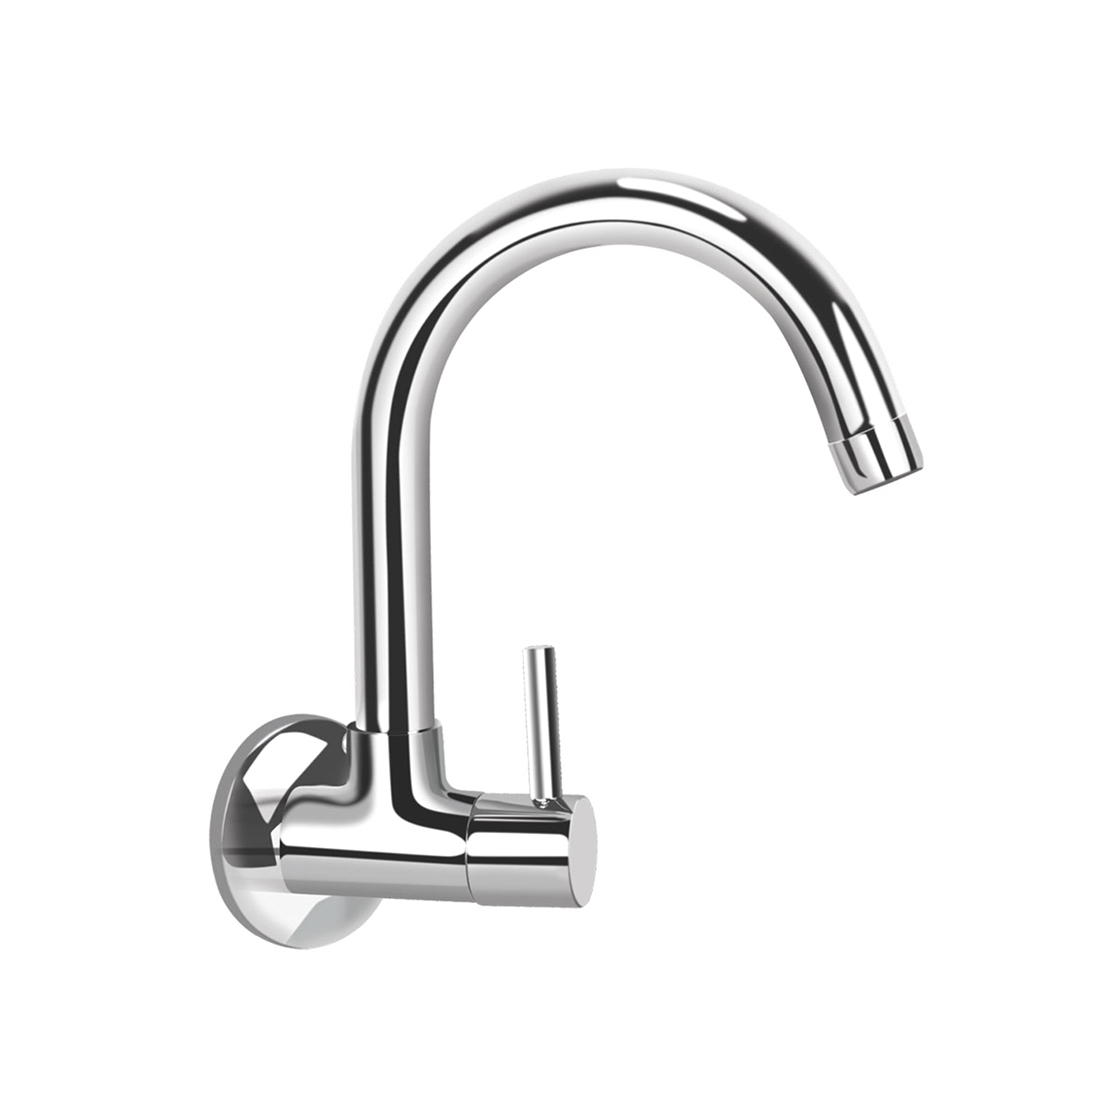 Kerovit Nucleus KB111025 Sink Cock With Swivel Spout and Flange